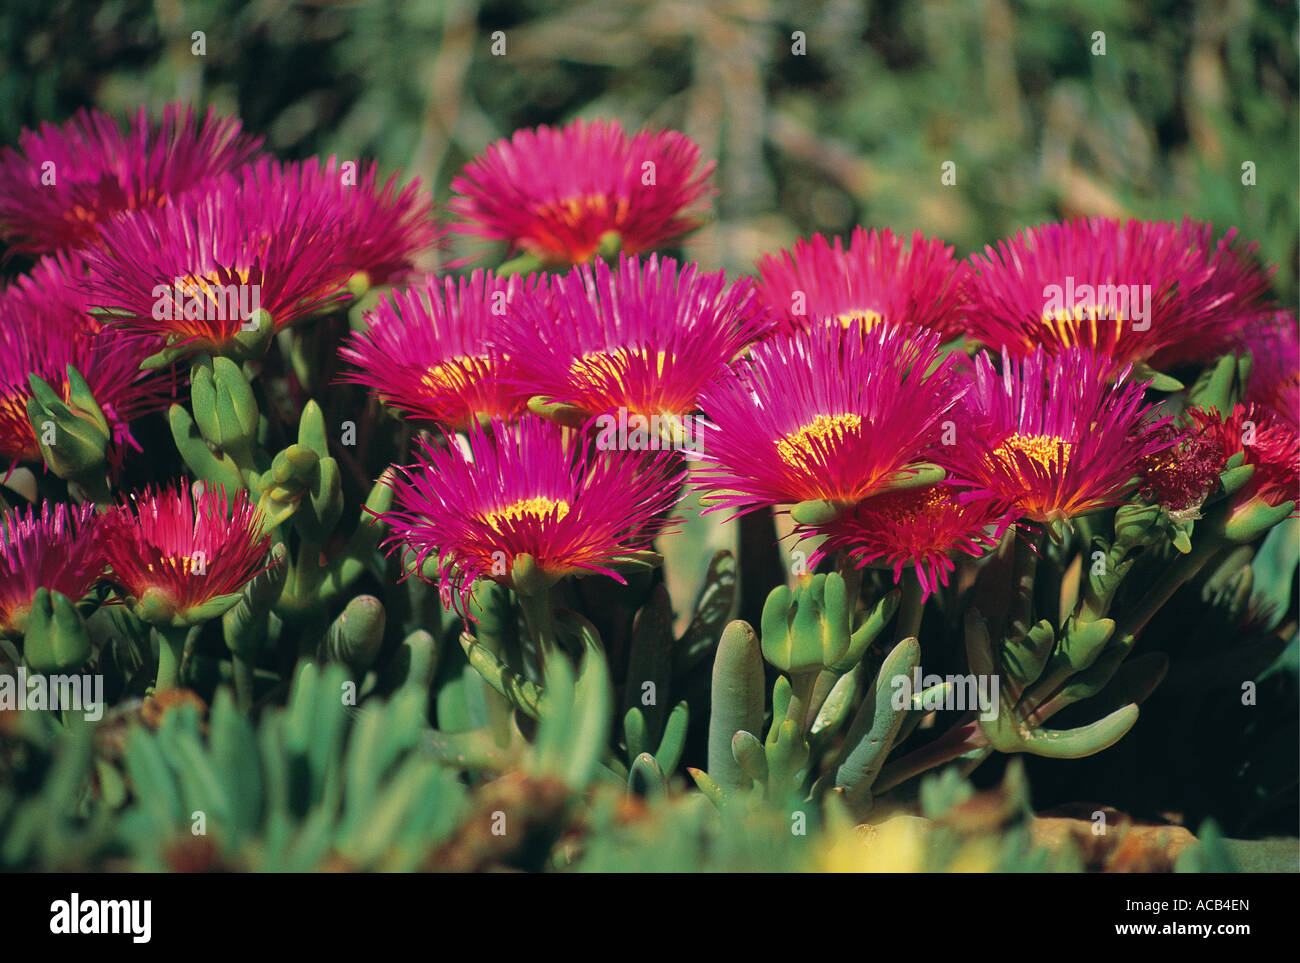 South Africa Succulents Mesembryantemaceae lampranthus coccineus Red Vygie North Cape South Africa Stock Photo